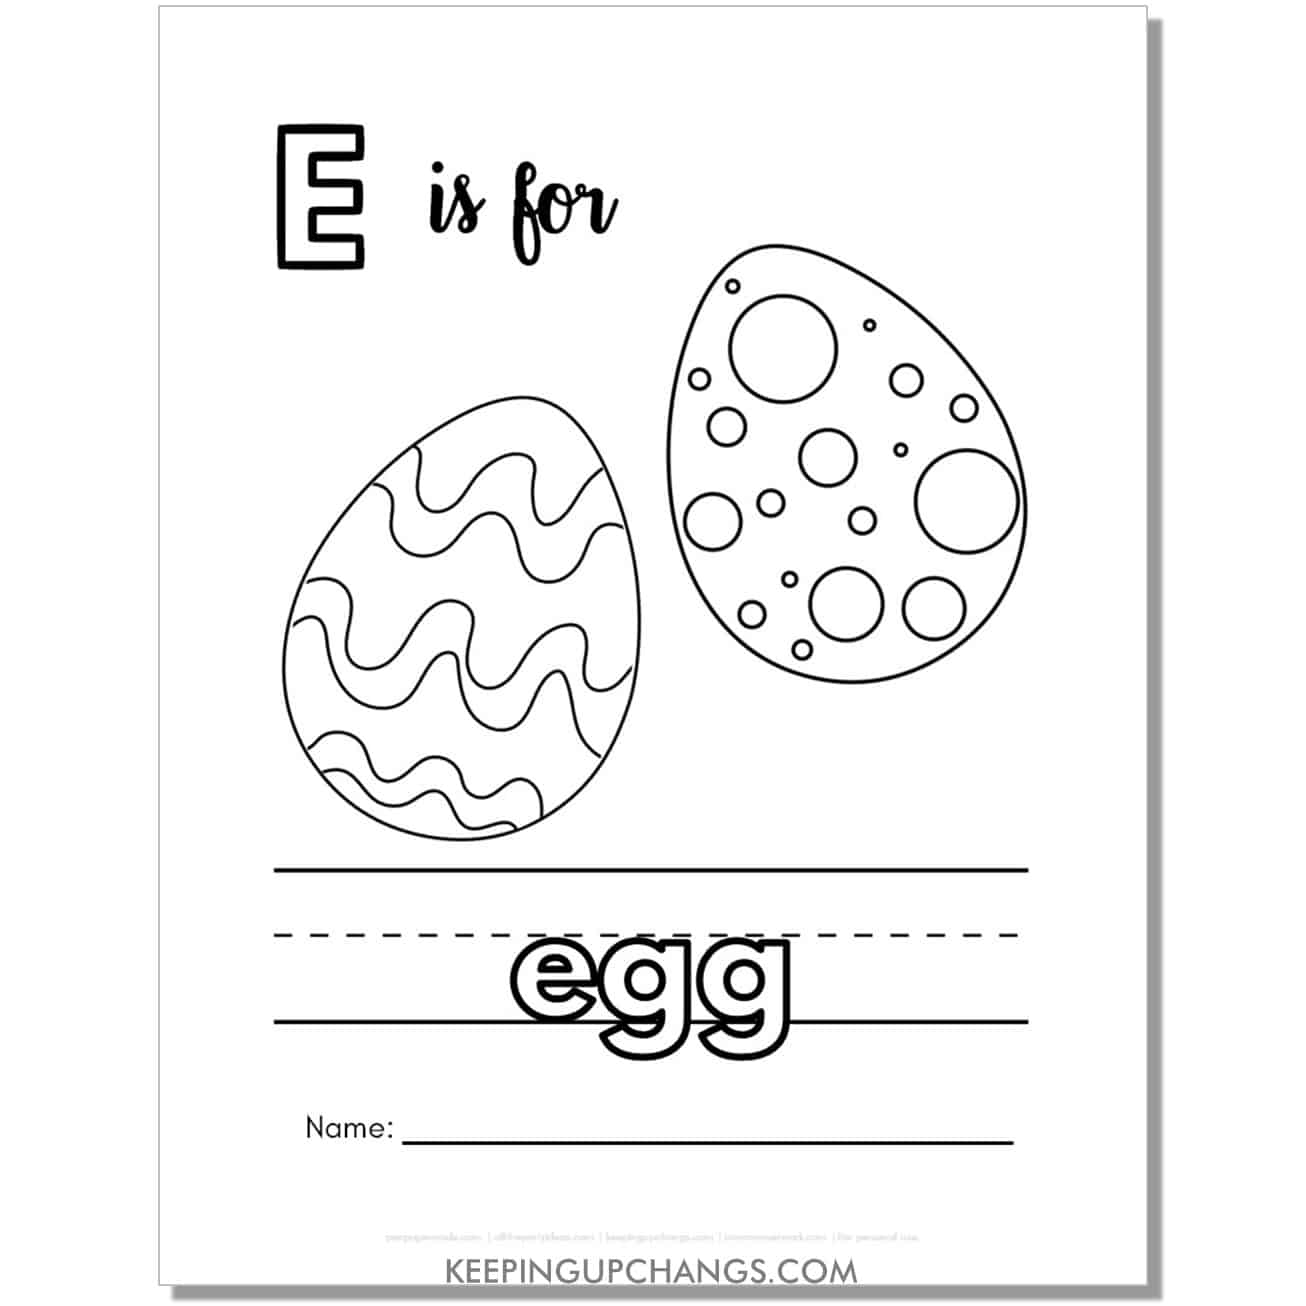 cute letter e coloring page worksheet with egg.